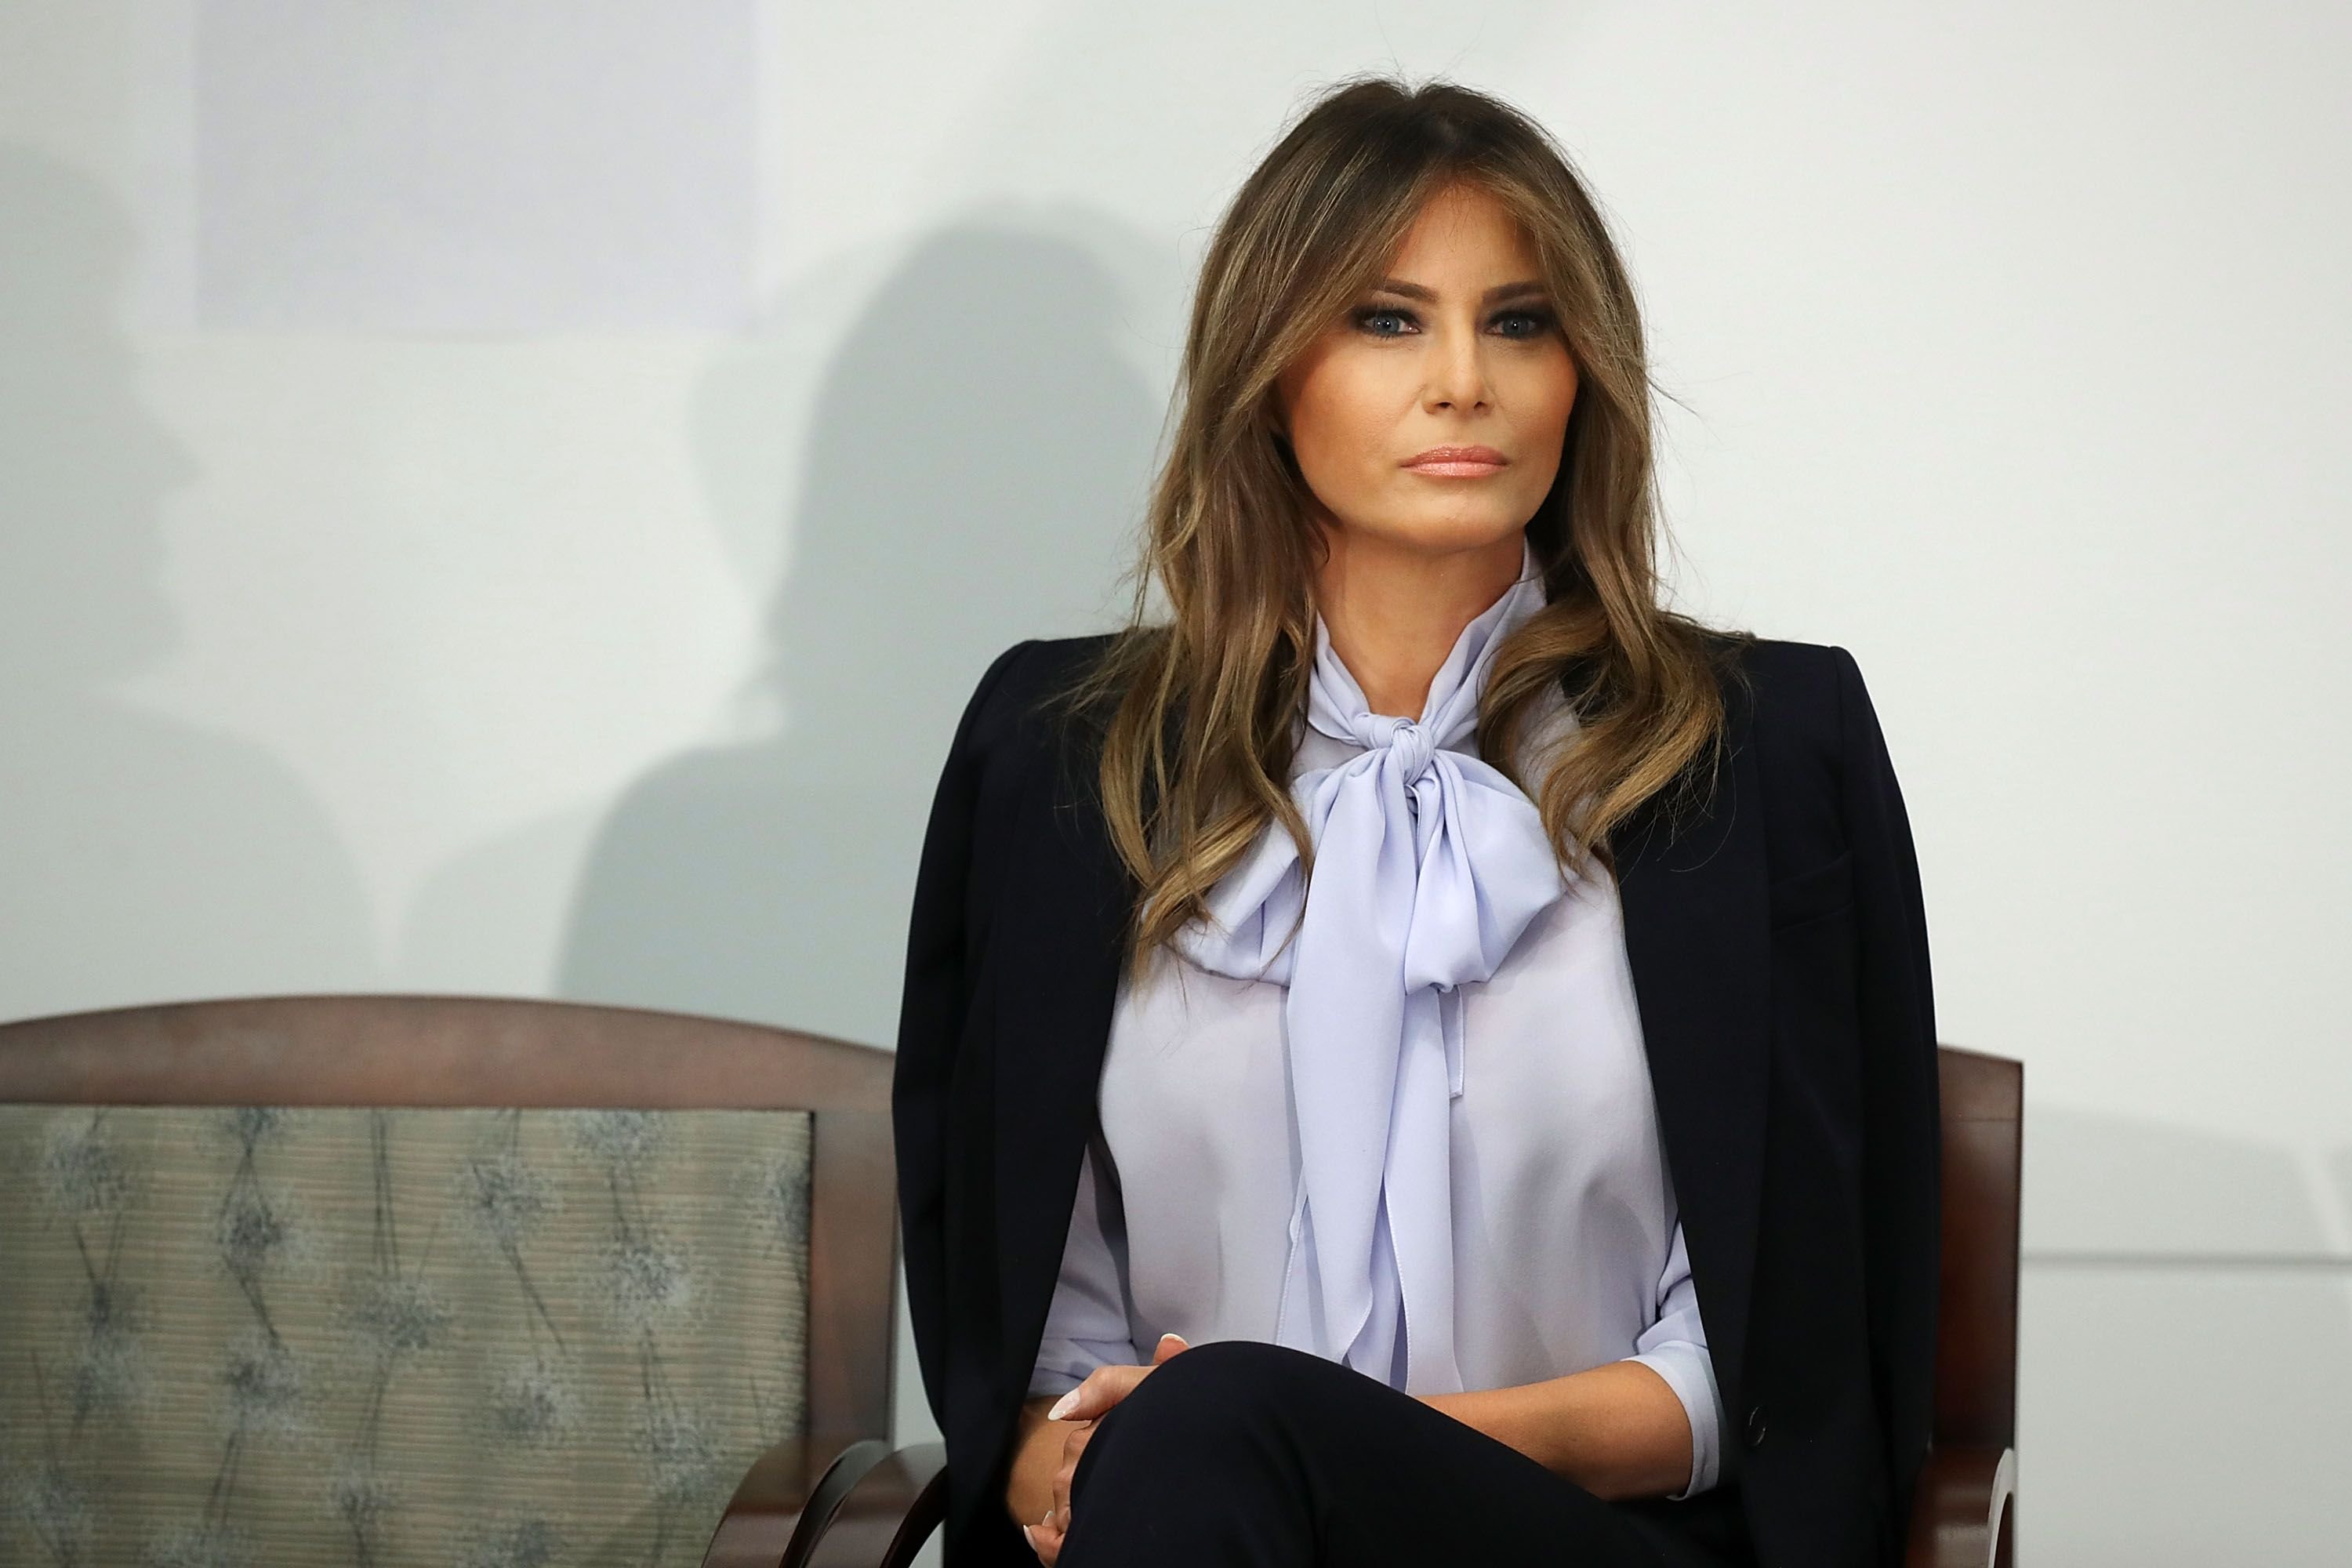 U.S. first lady Melania Trump attends a Federal Partners in Bullying Prevention summit at the Health Resources and Service Administration August 20, 2018 in Rockville, Maryland. | Photo: Getty images